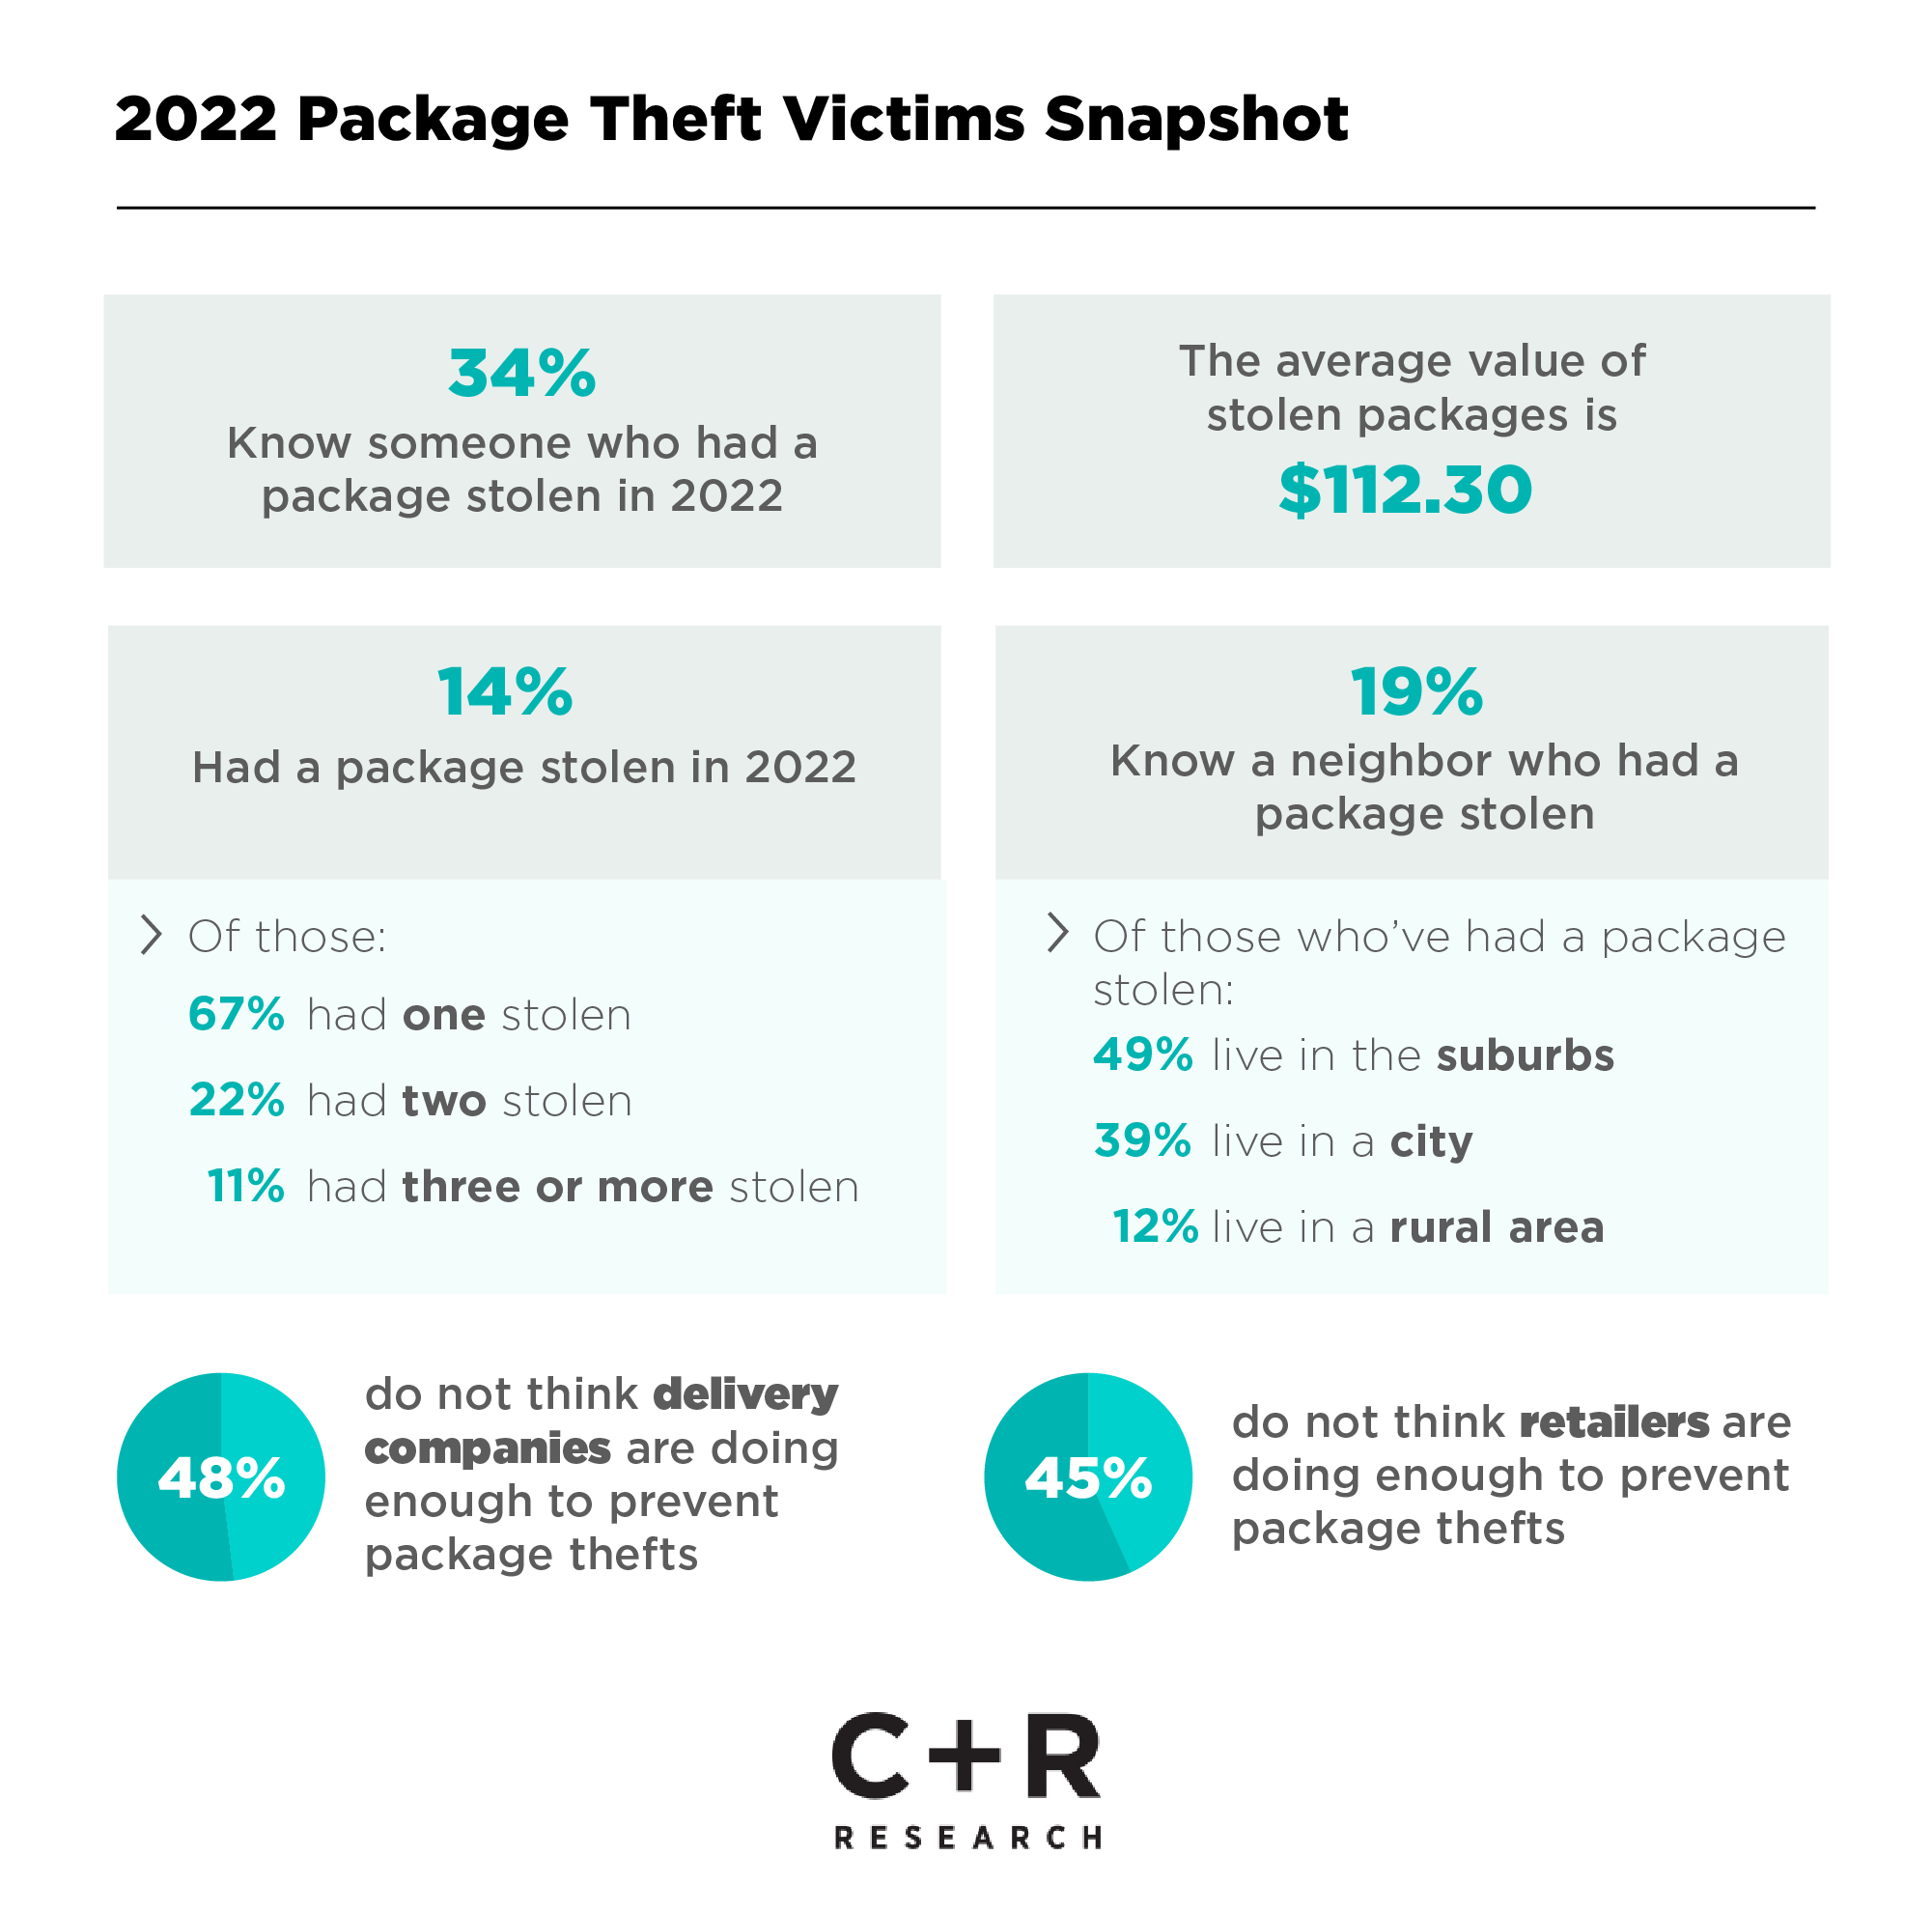 Package Theft Statistics - A Survey by C+R Research; Image Credit: C+R Research